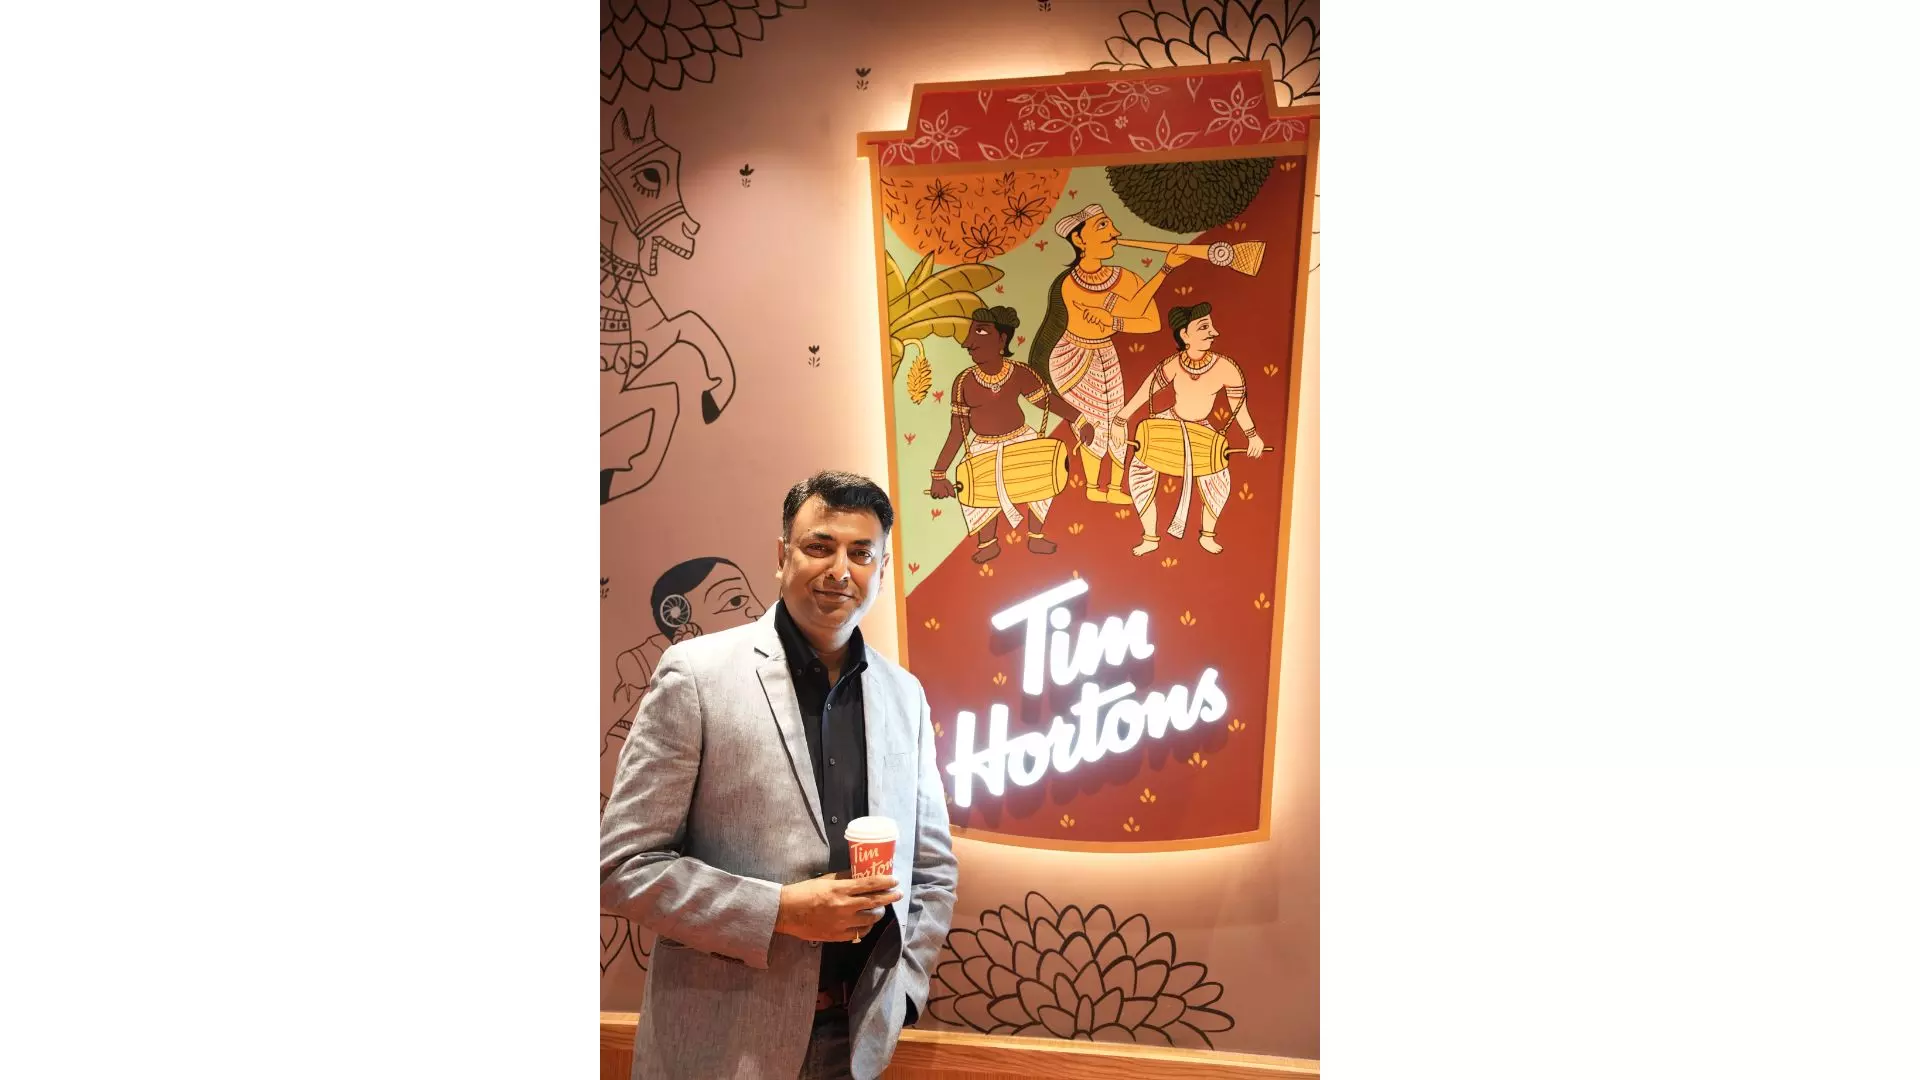 Tim Hortons Ethical Sourcing and Iconic Products Make Mark in Hyderabad Debut